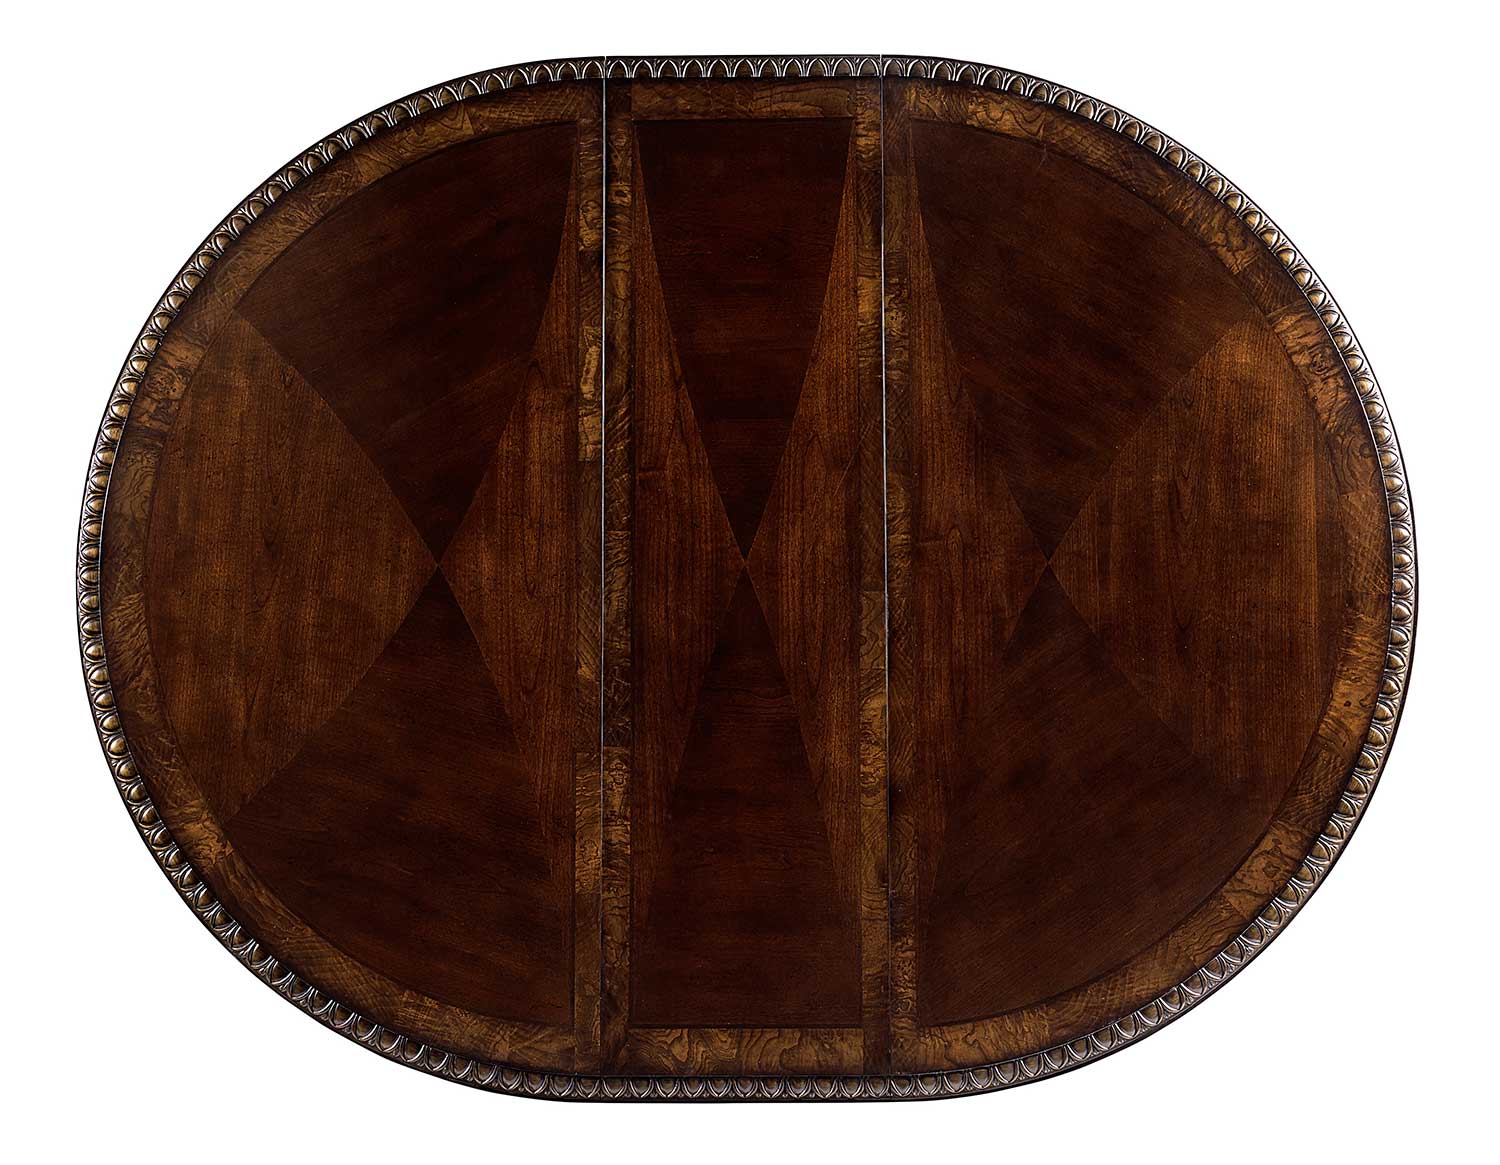 Homelegance Bonaventure Park Round / Oval Pedestal Dining Table with Leaf - Gold-Highlighted Cherry